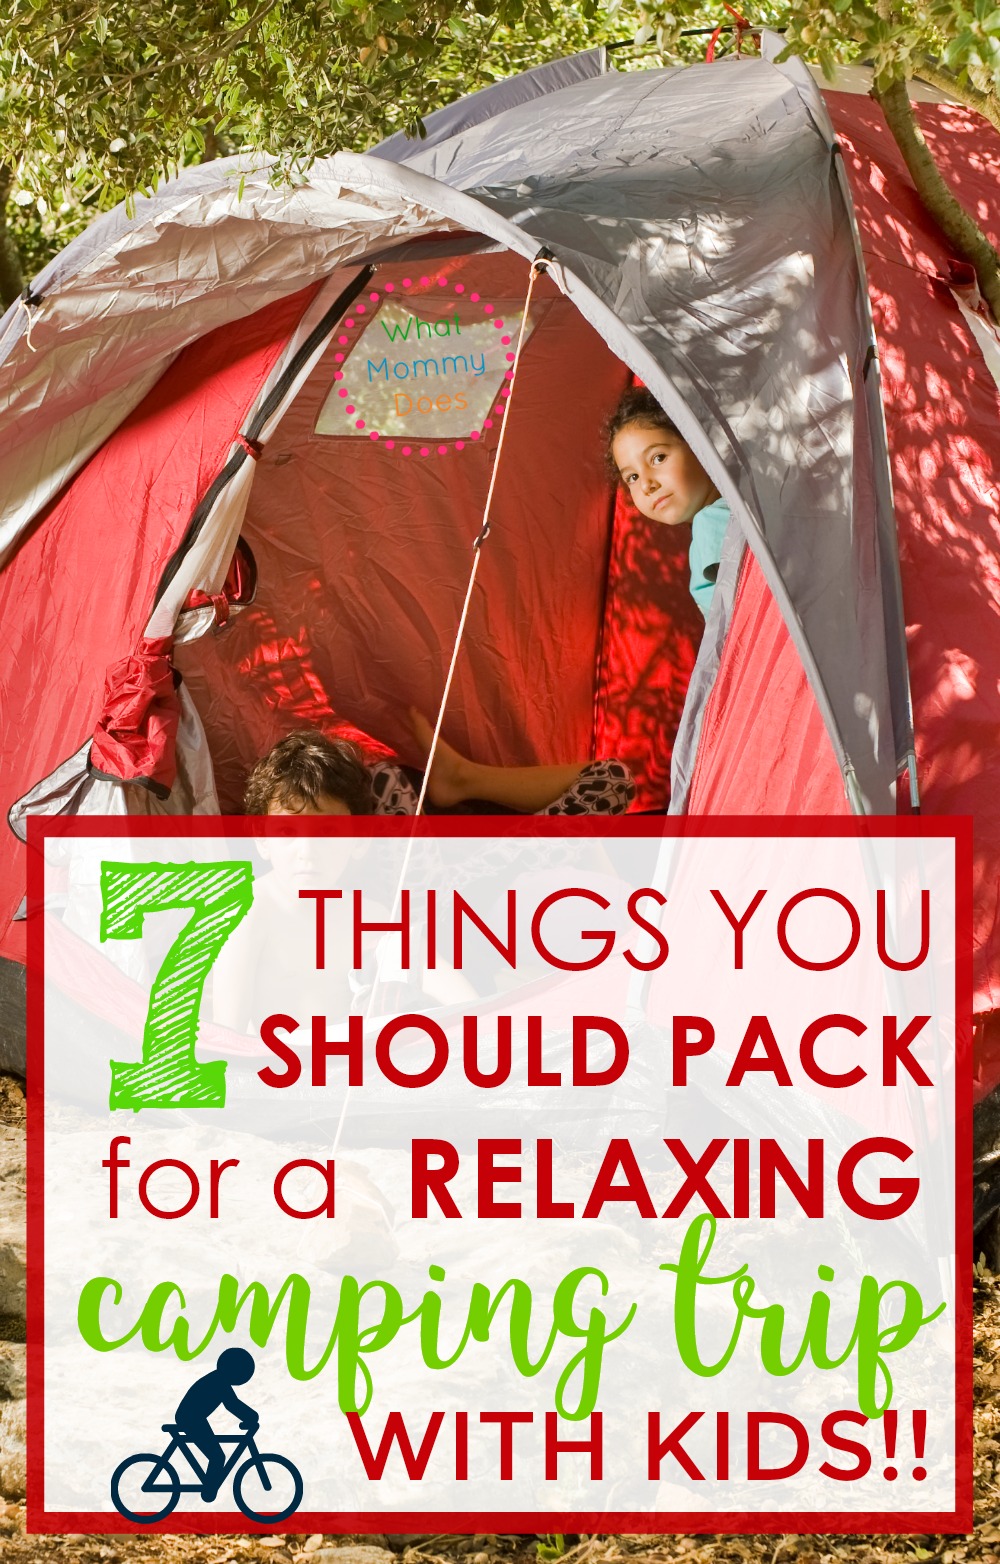 Before you even THINK of going camping with your kids, make sure you have these 7 things with you. This is the "nuts and bolts" family camping trip checklist. Take these things & you'll be 1000% more guaranteed to have smooth sailing. I wish I had had this checklist the first time I went campign with toddlers! | camping tips, family camping ideas